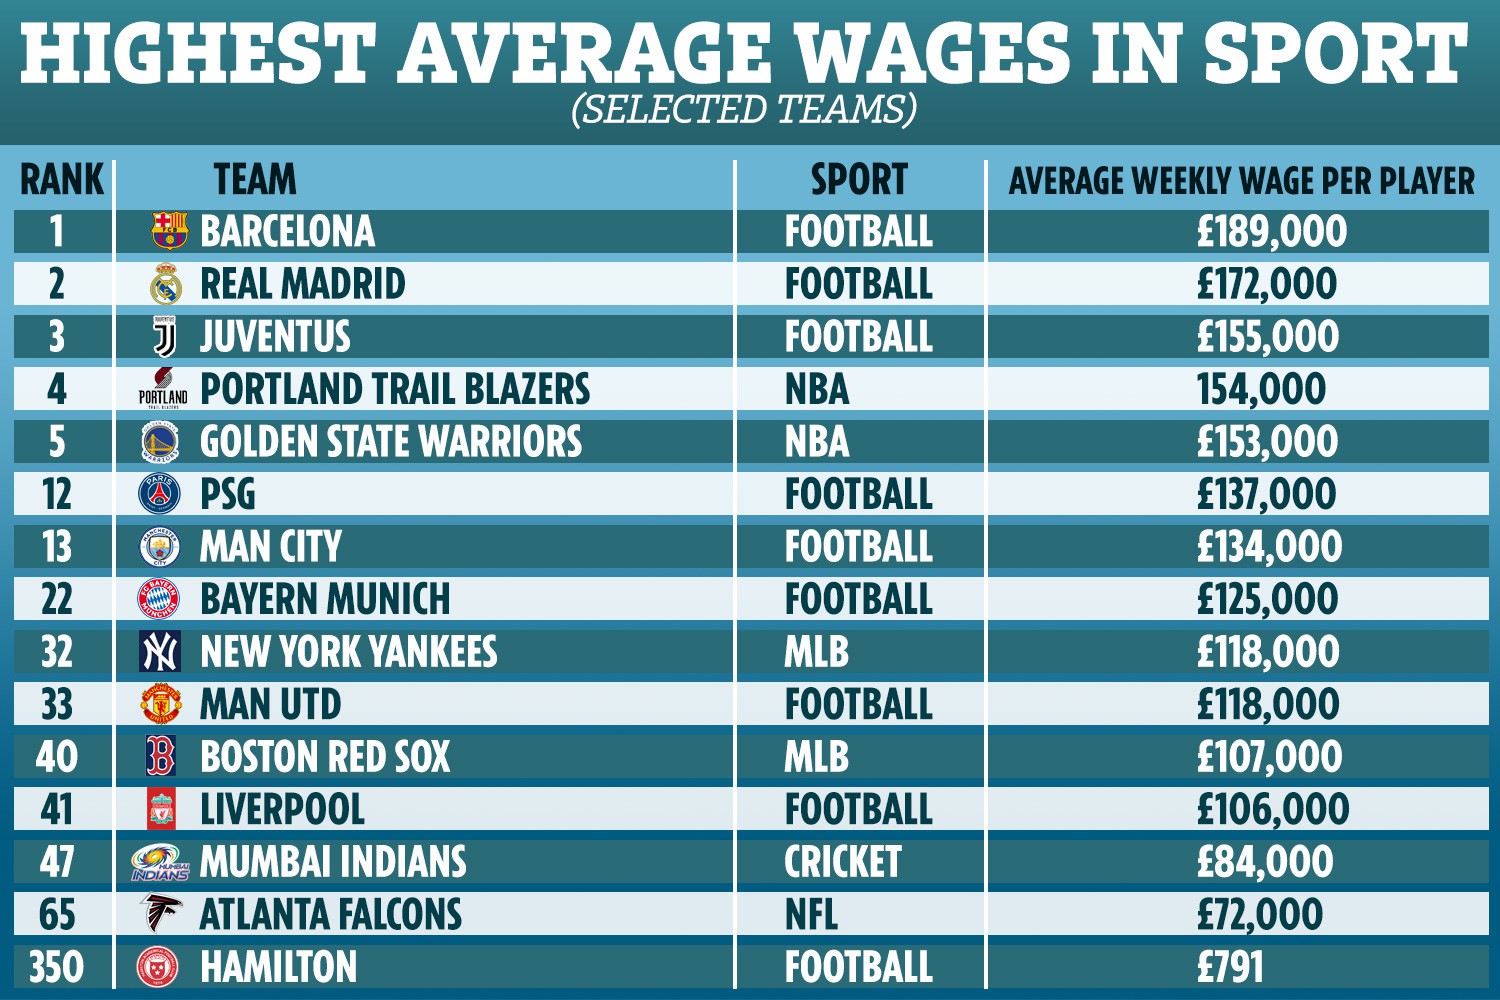 , Man Utd drop from ninth to 33rd in sporting wage league as Barca, Real Madrid and Juventus take top three spots